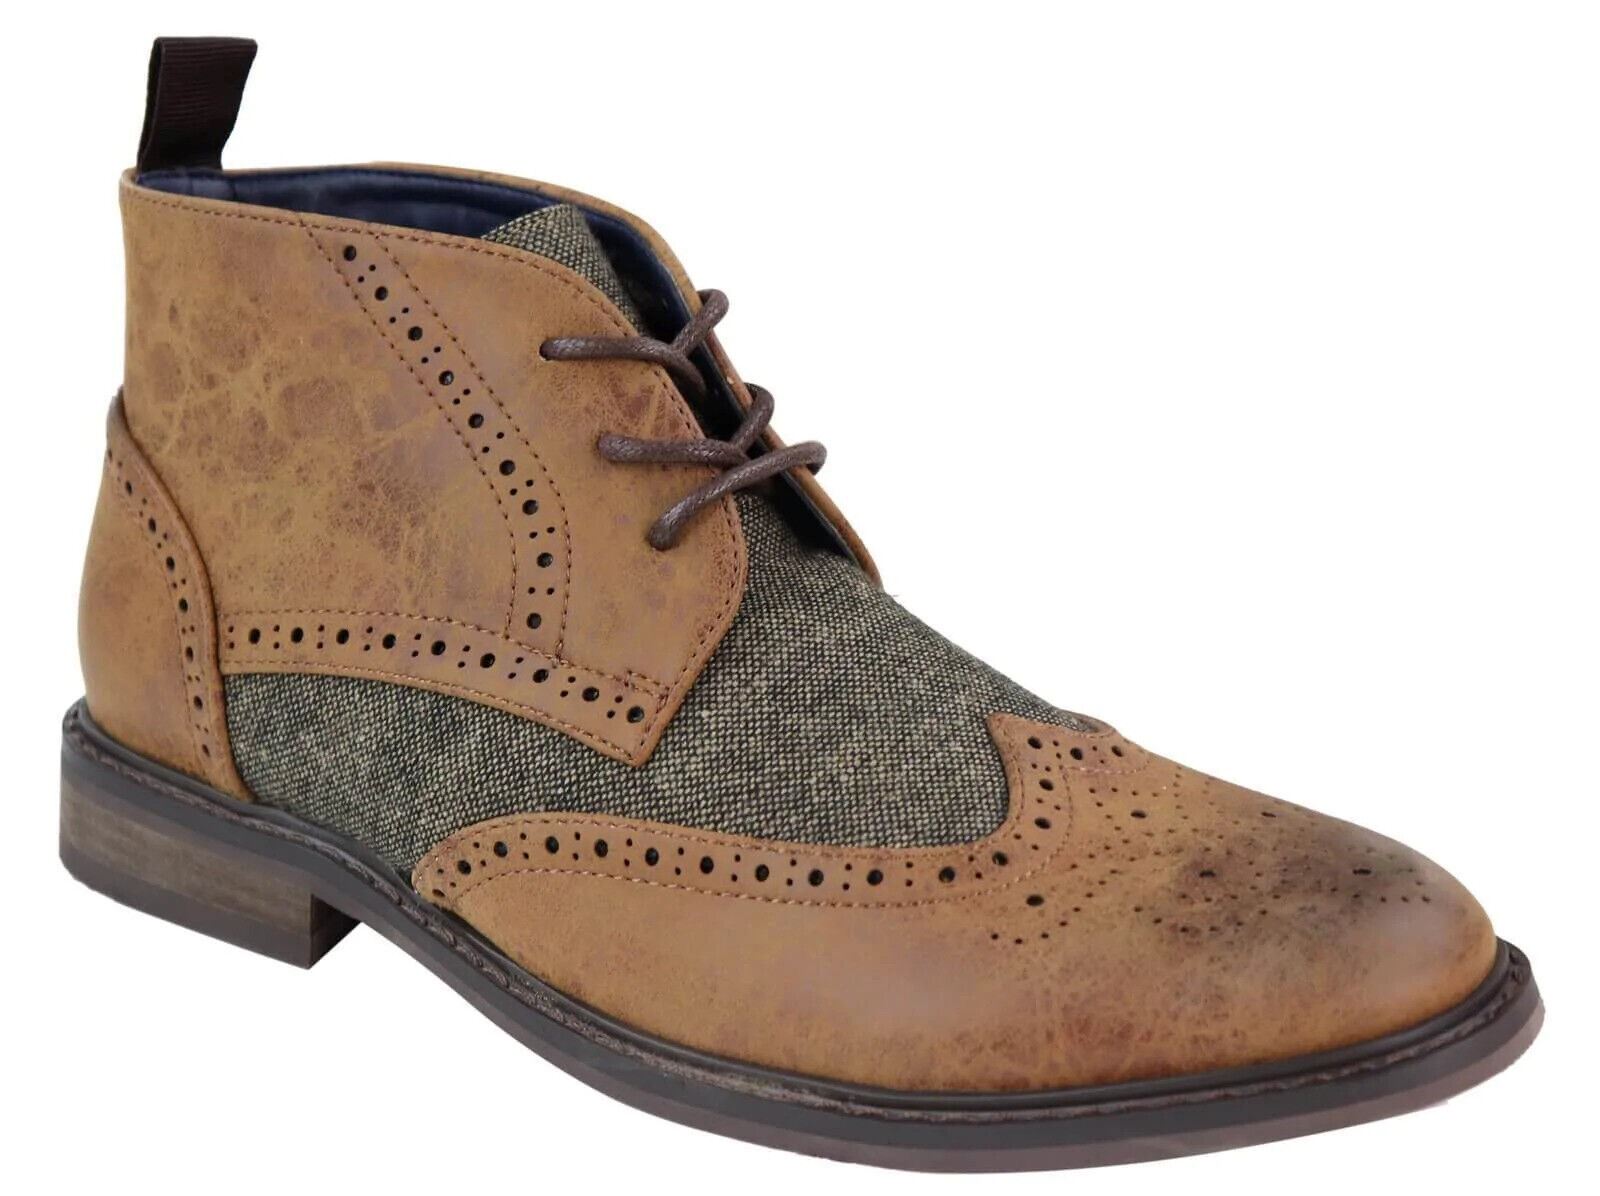 Mens Classic Tweed Oxford Brogue Ankle Boots in Tan Leather